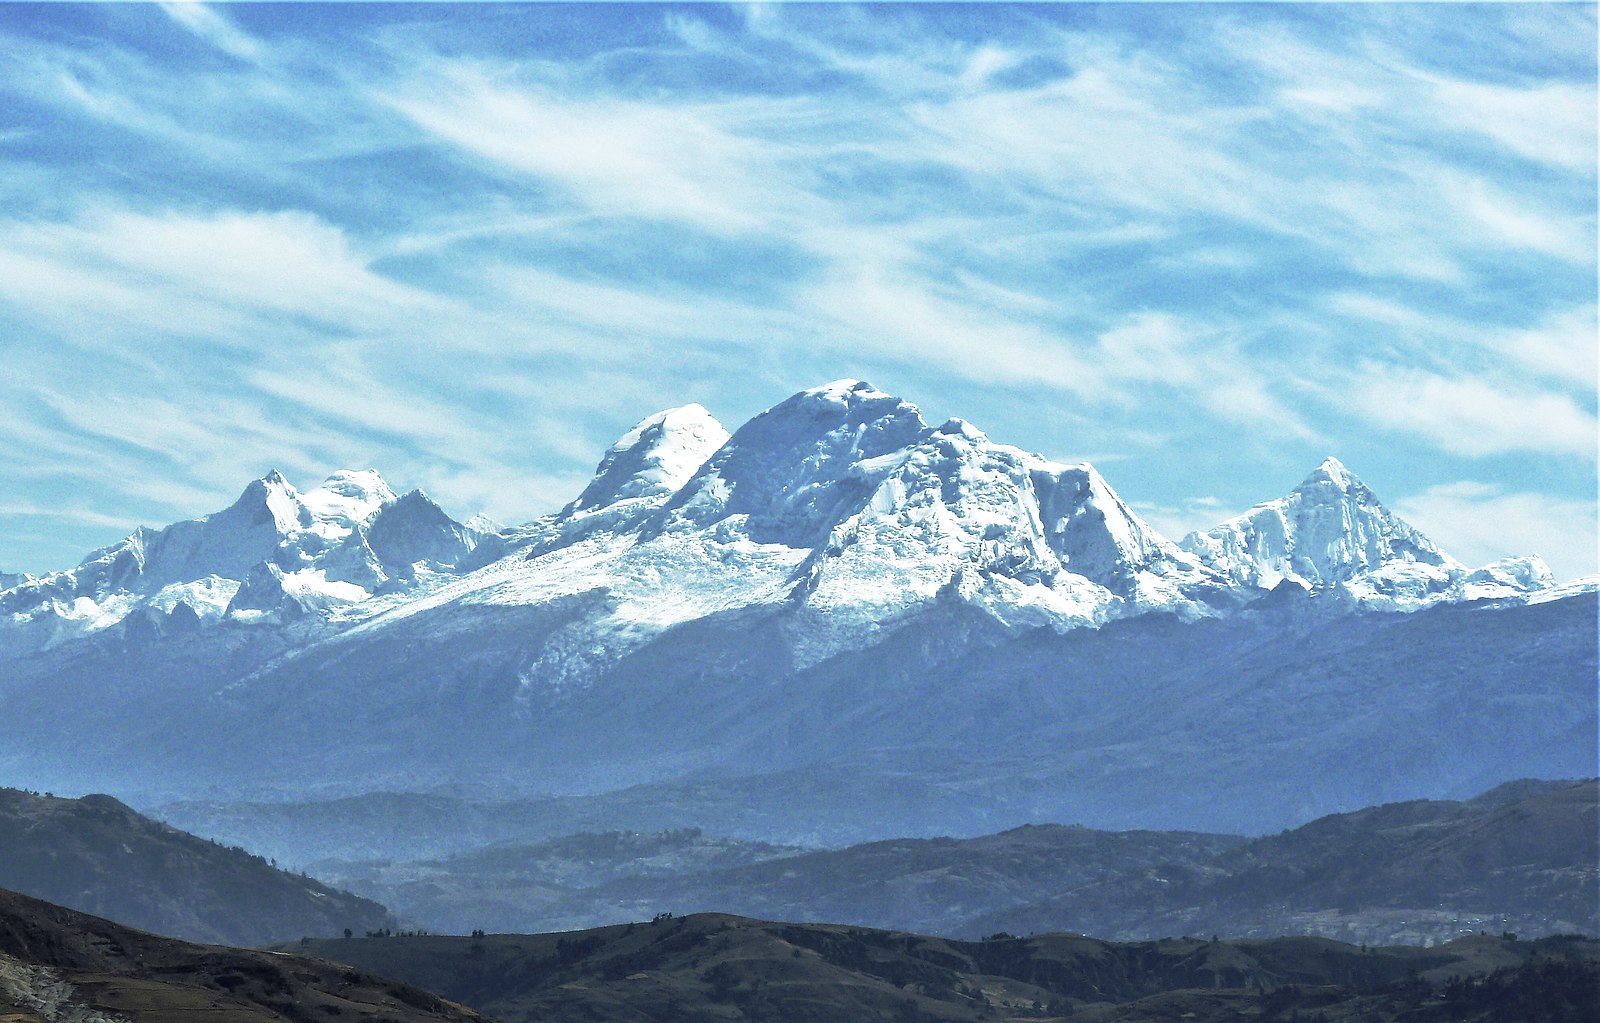 The Andes mountains in Peru, a sacred source of identity and inspiration for Arguedas and the Quechua culture